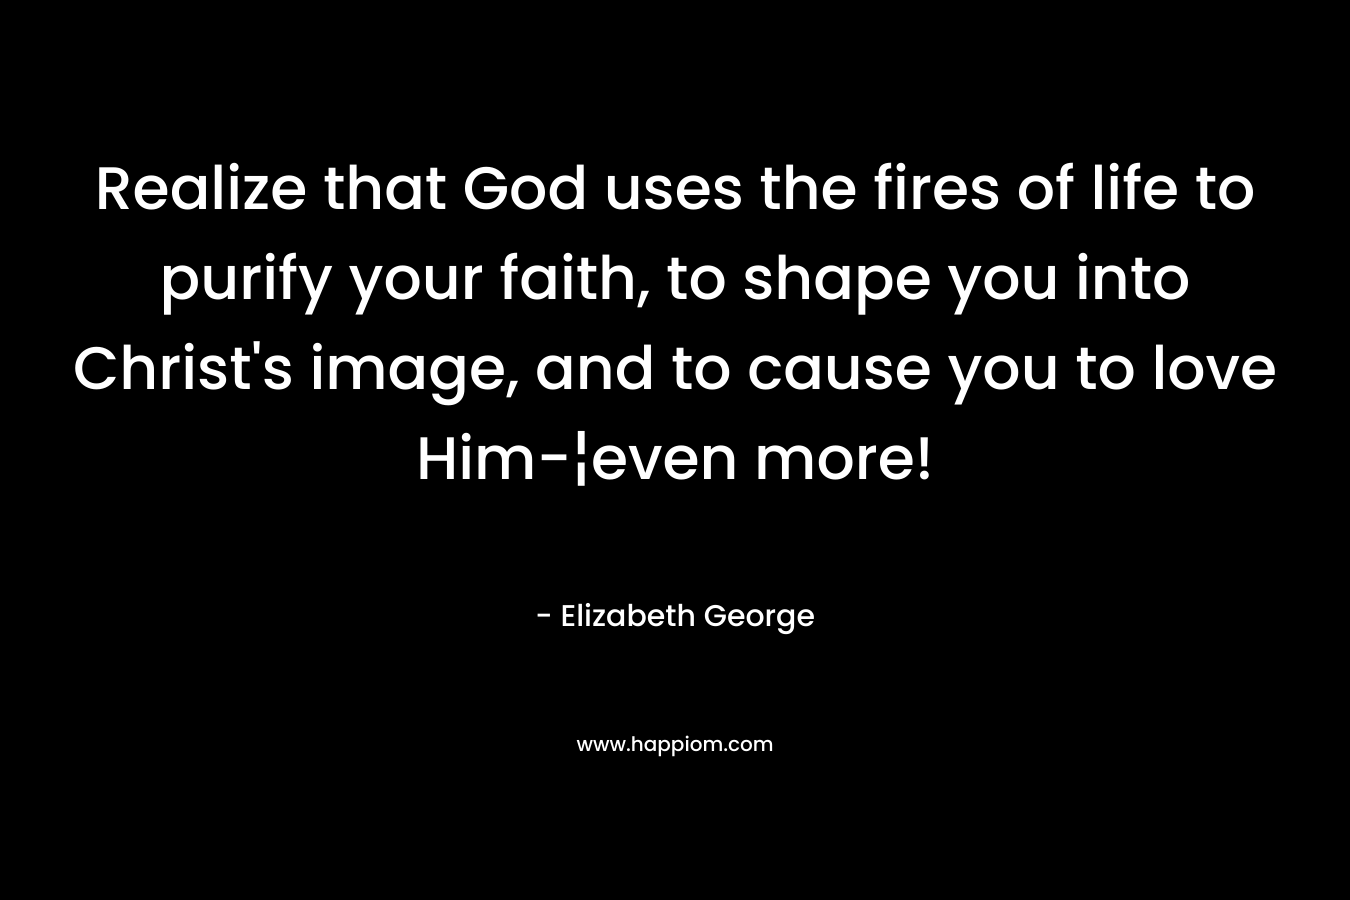 Realize that God uses the fires of life to purify your faith, to shape you into Christ’s image, and to cause you to love Him-¦even more! – Elizabeth George